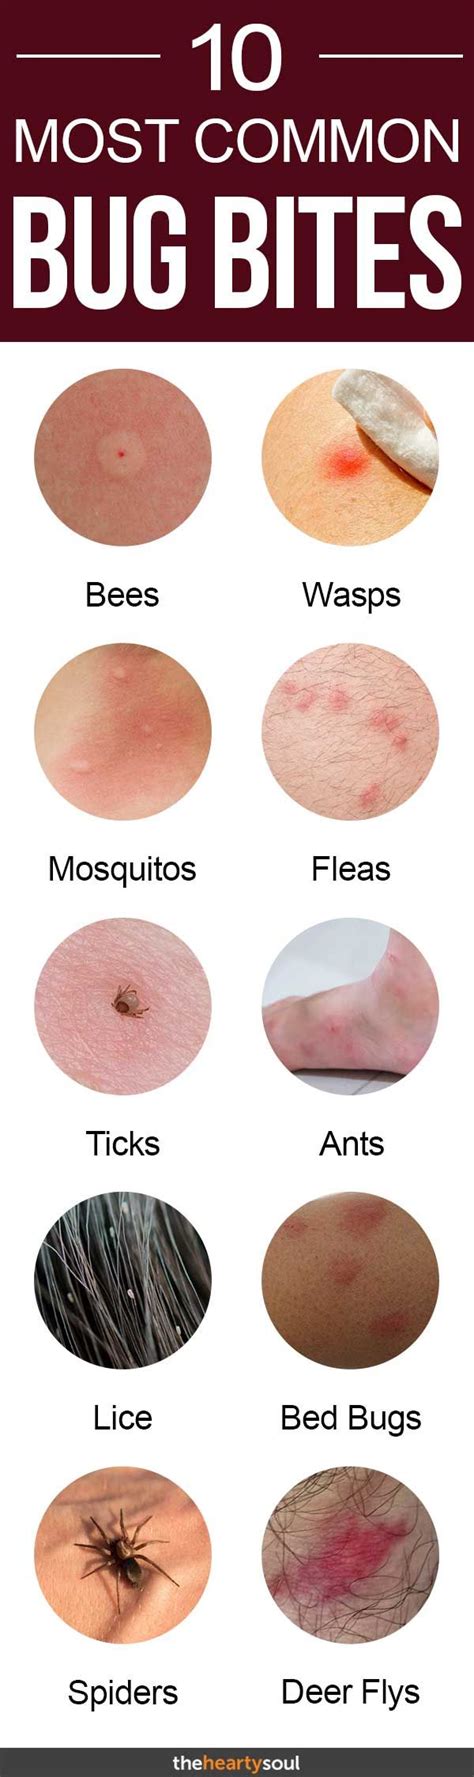 10 Bug Bites Anyone Should Be Able To Identify Bug Bites Insect Bites Health And Beauty Tips